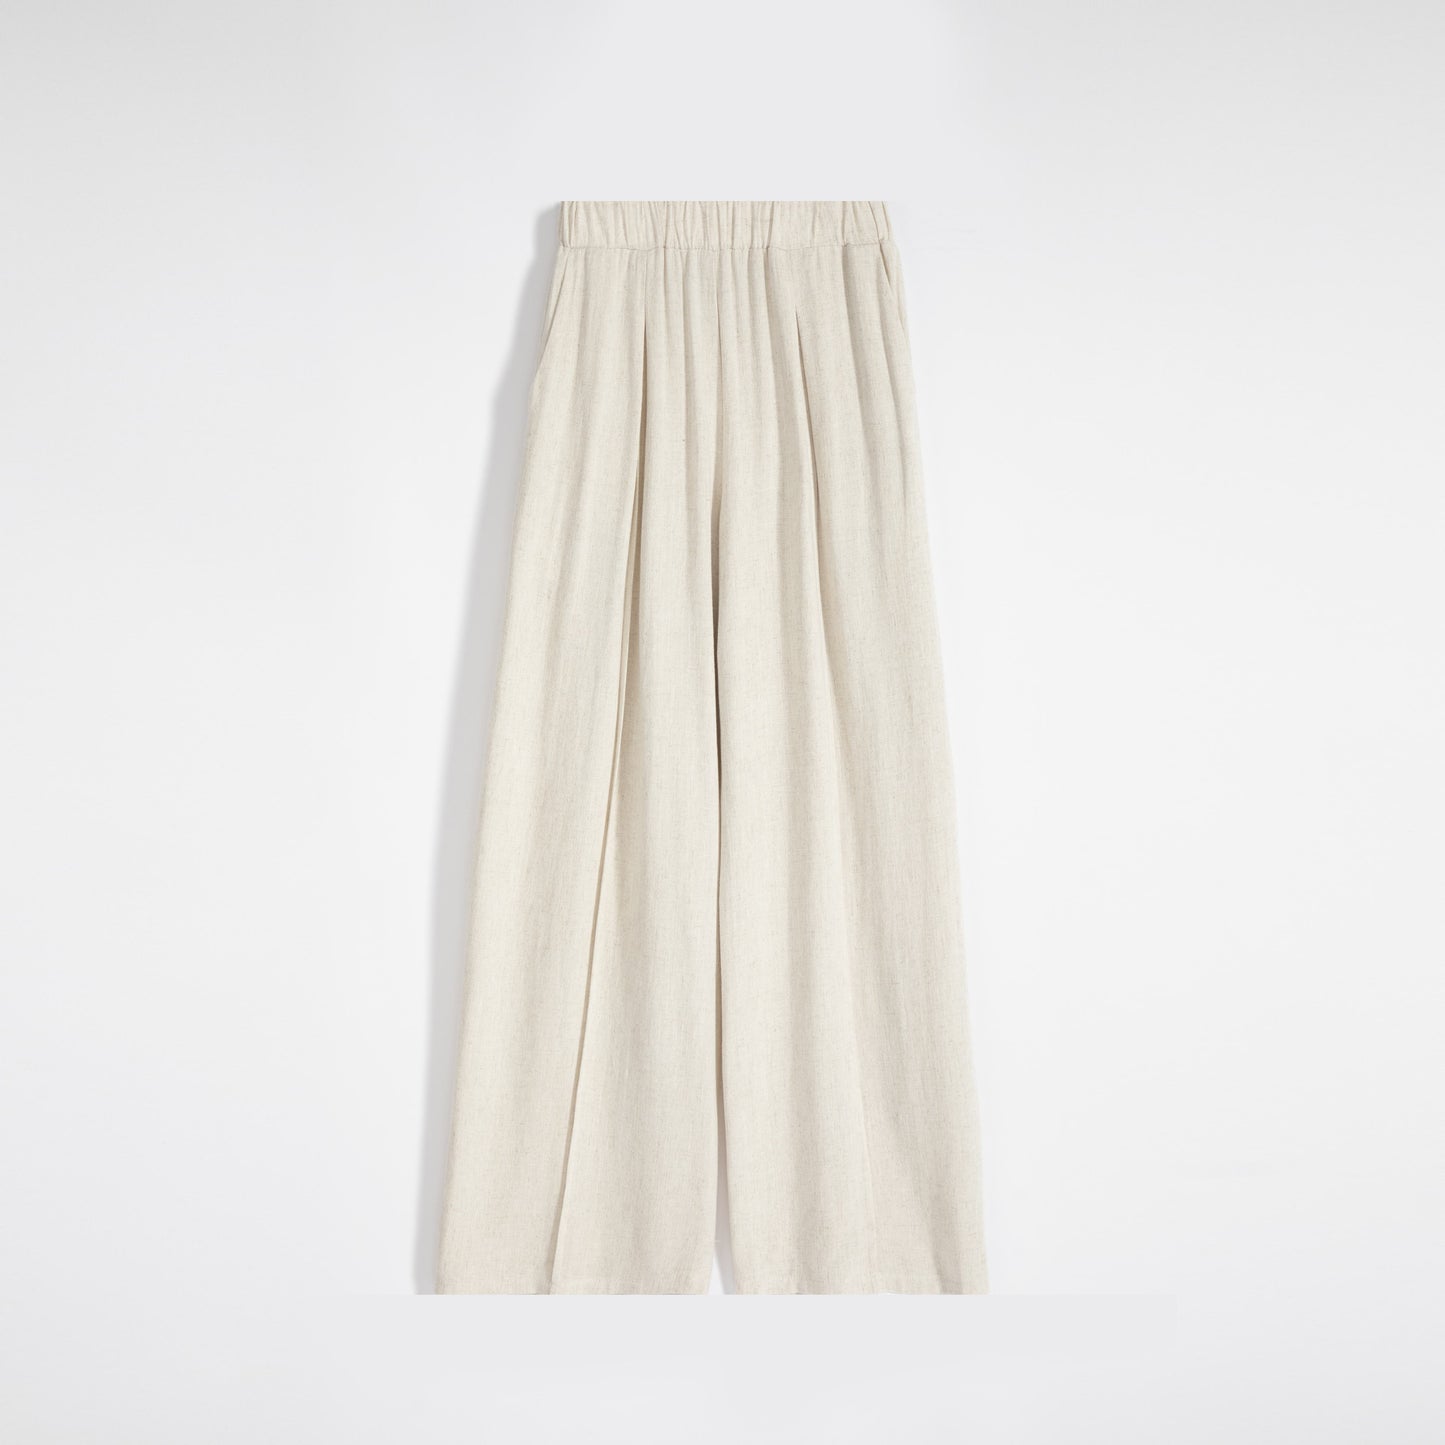 Loose-Fit Silky Linen High-Waisted Lazy Thin Pants